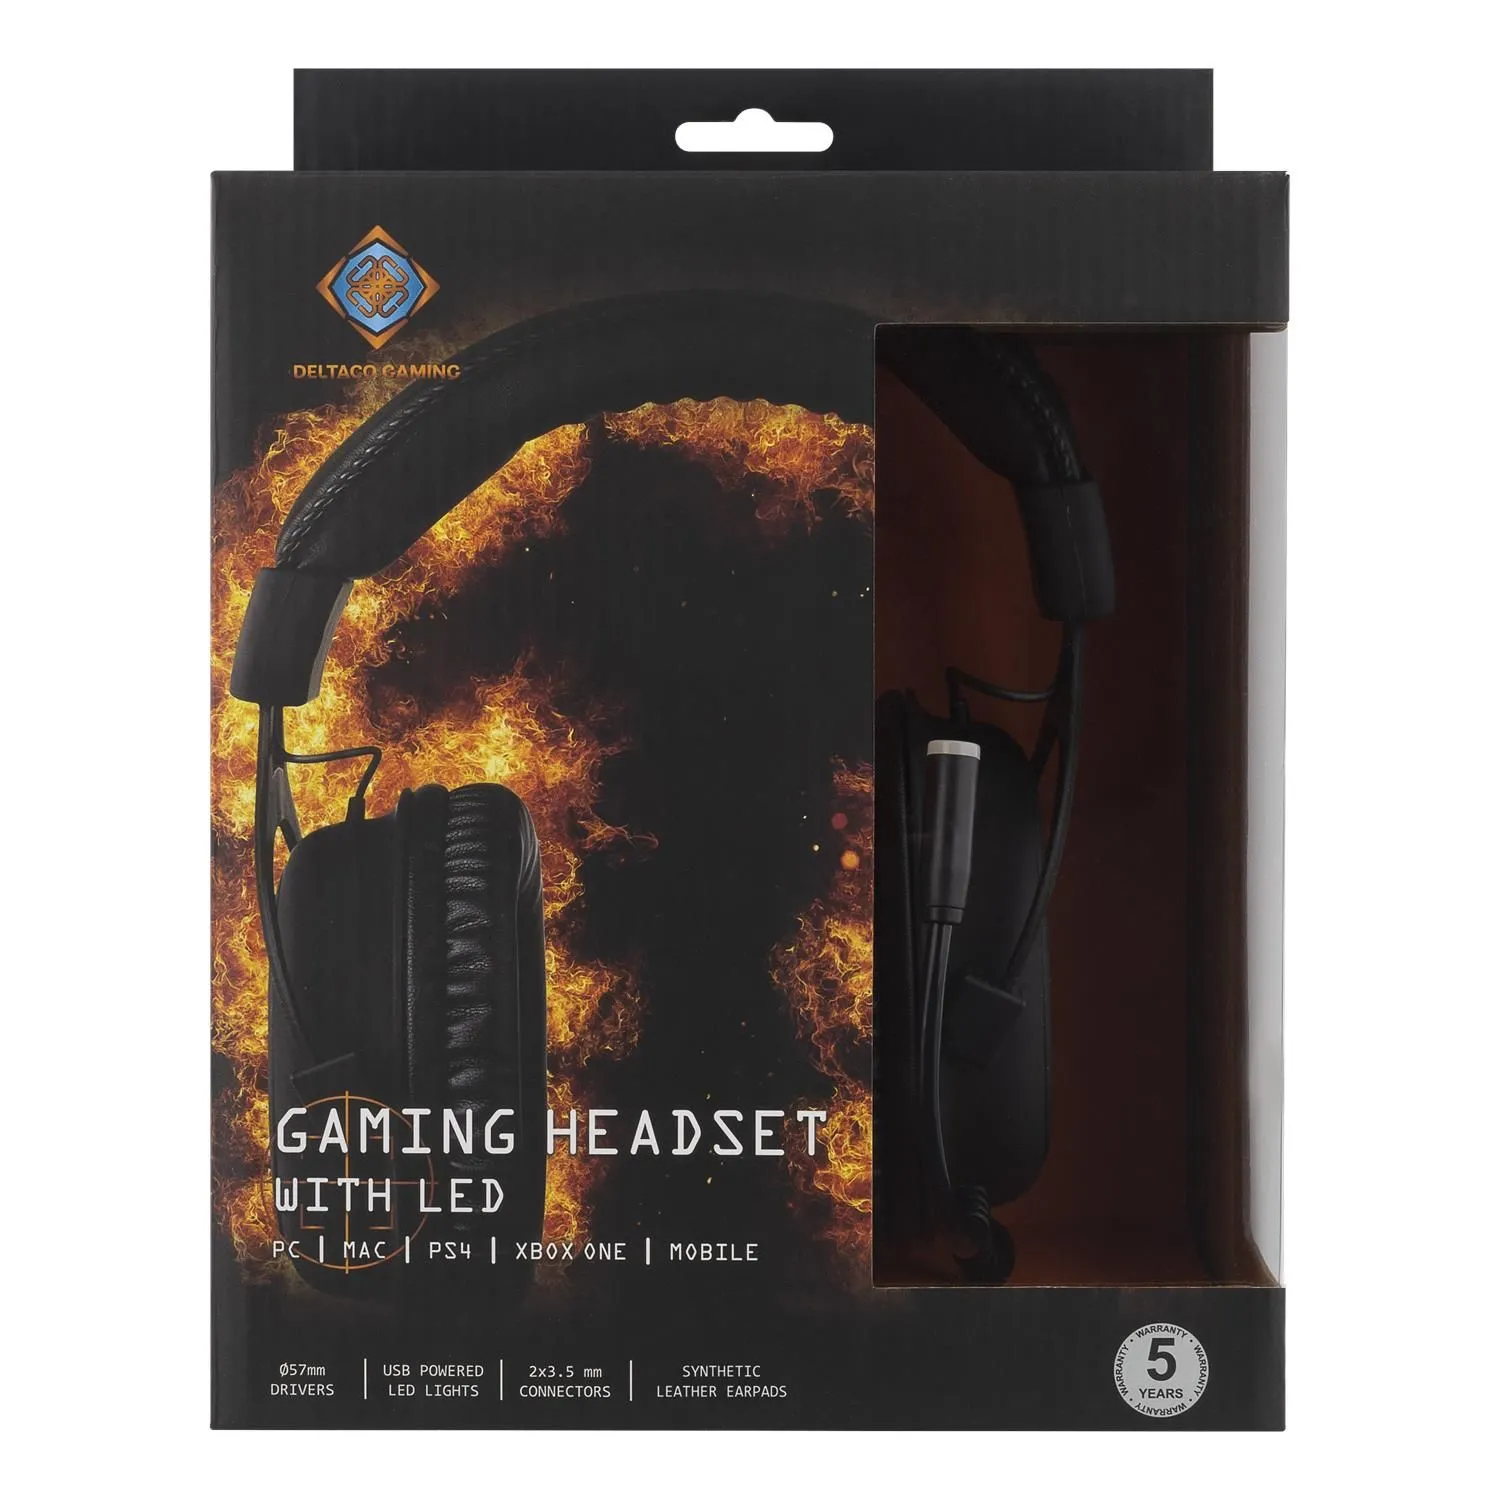 GAMING Headset, DH310